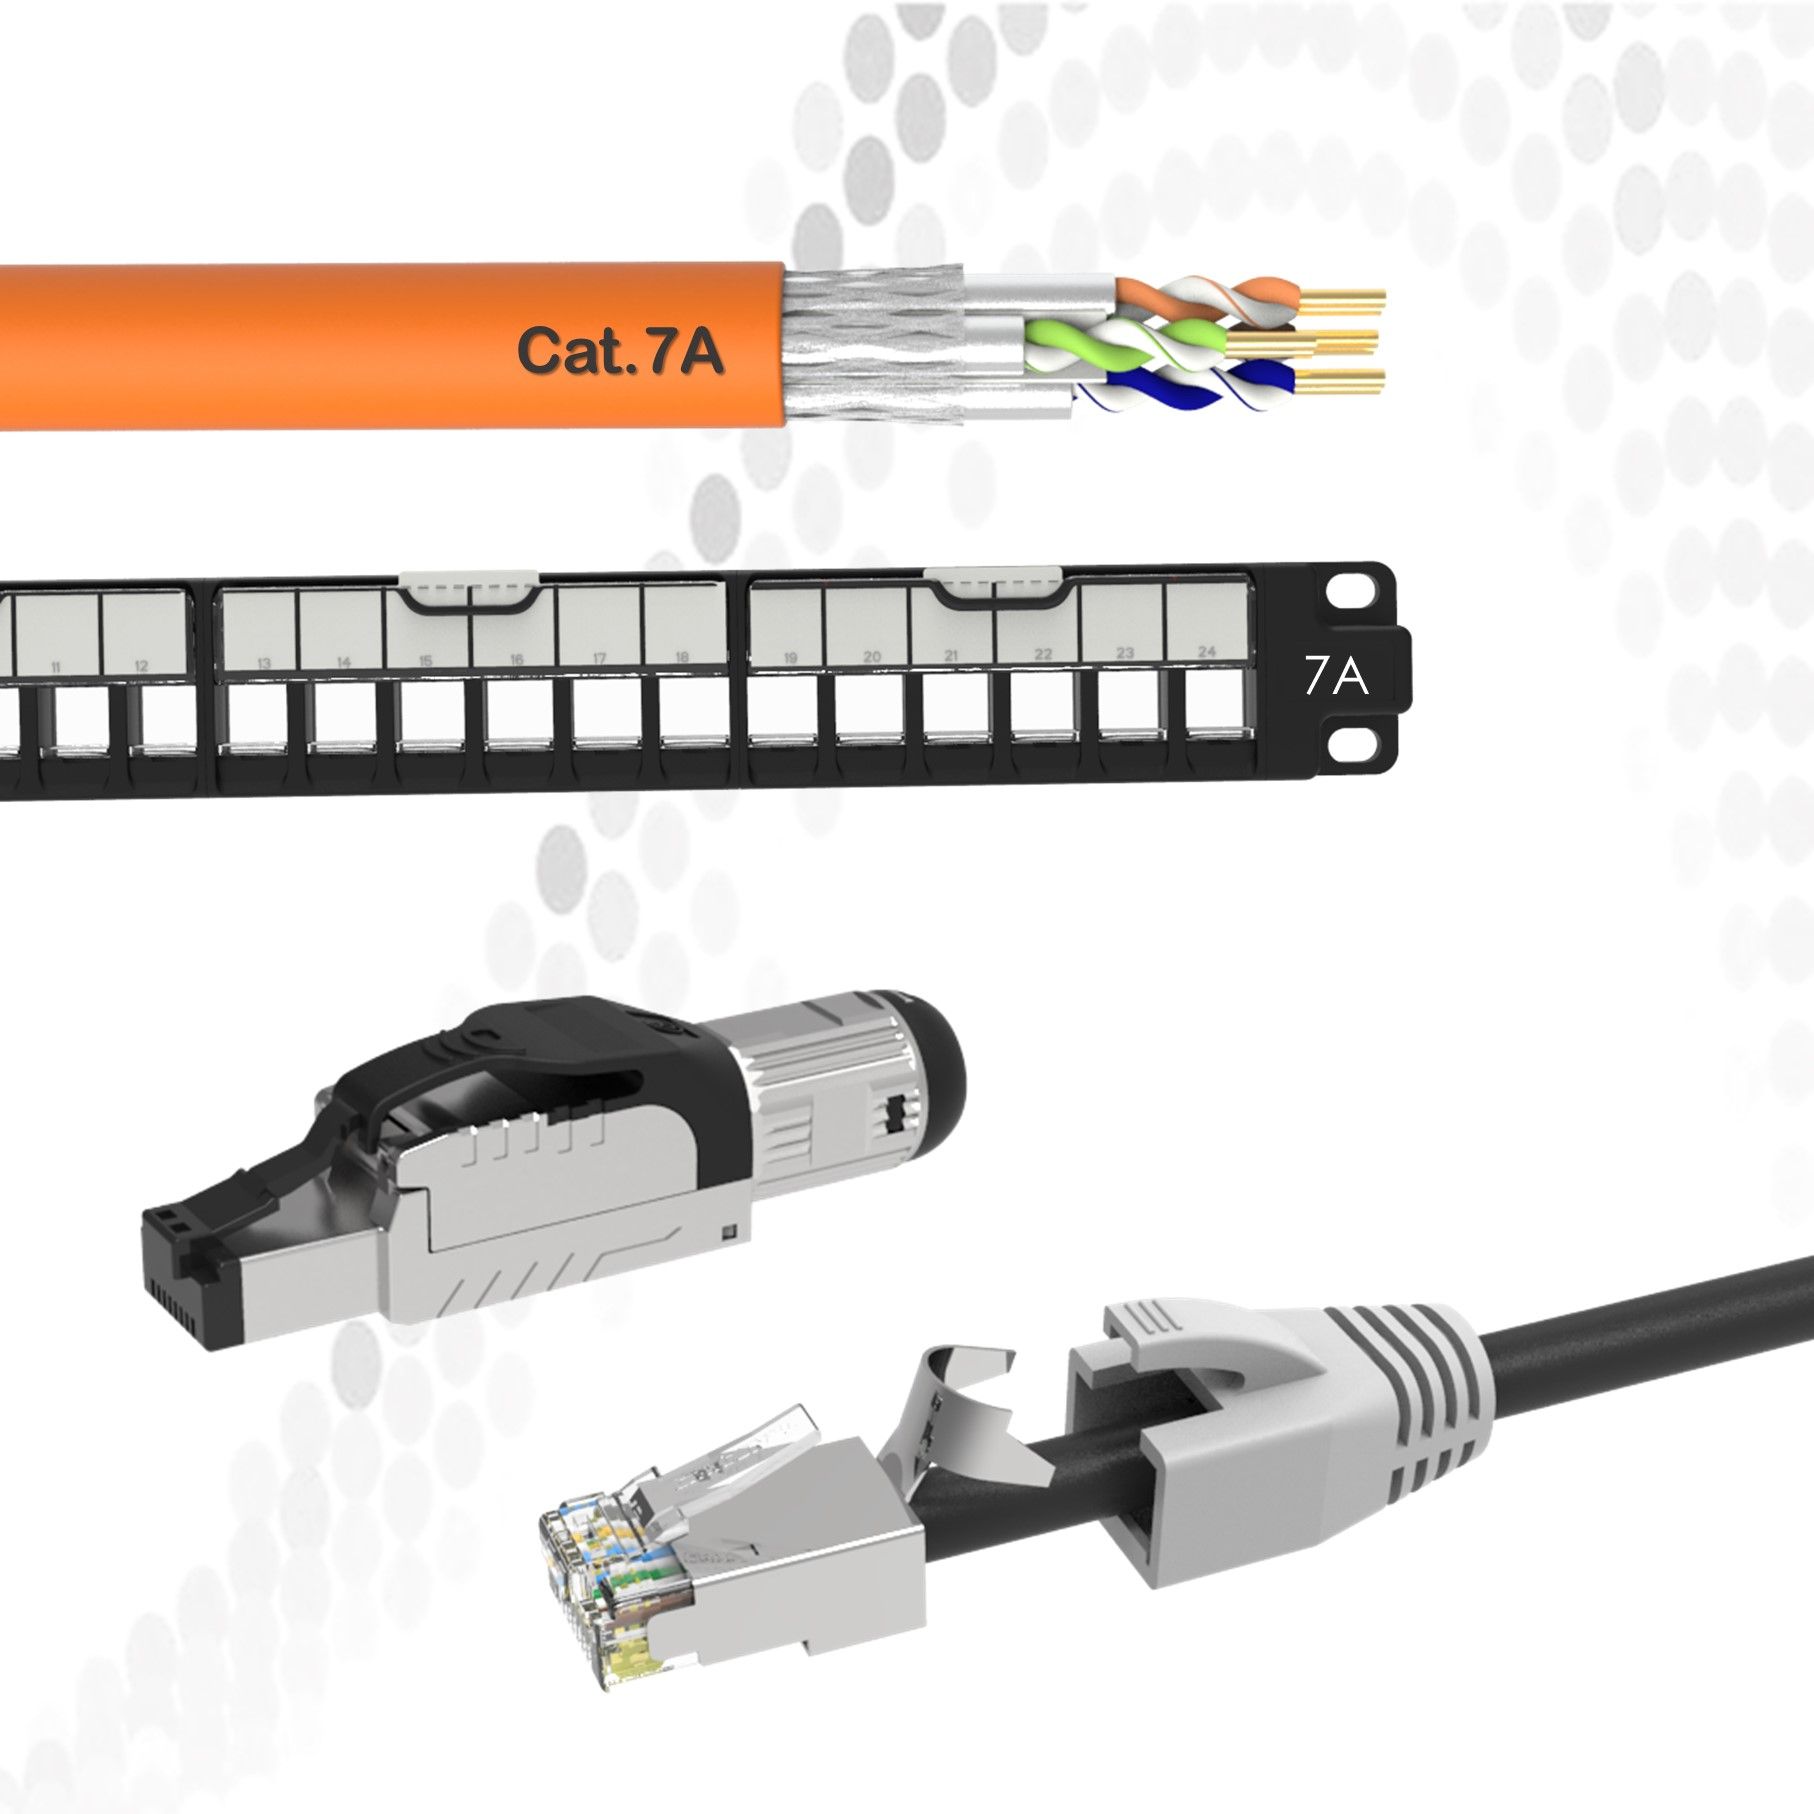 Cat7A Structured Cabling 10G+ Ethernet Solution Cat7A